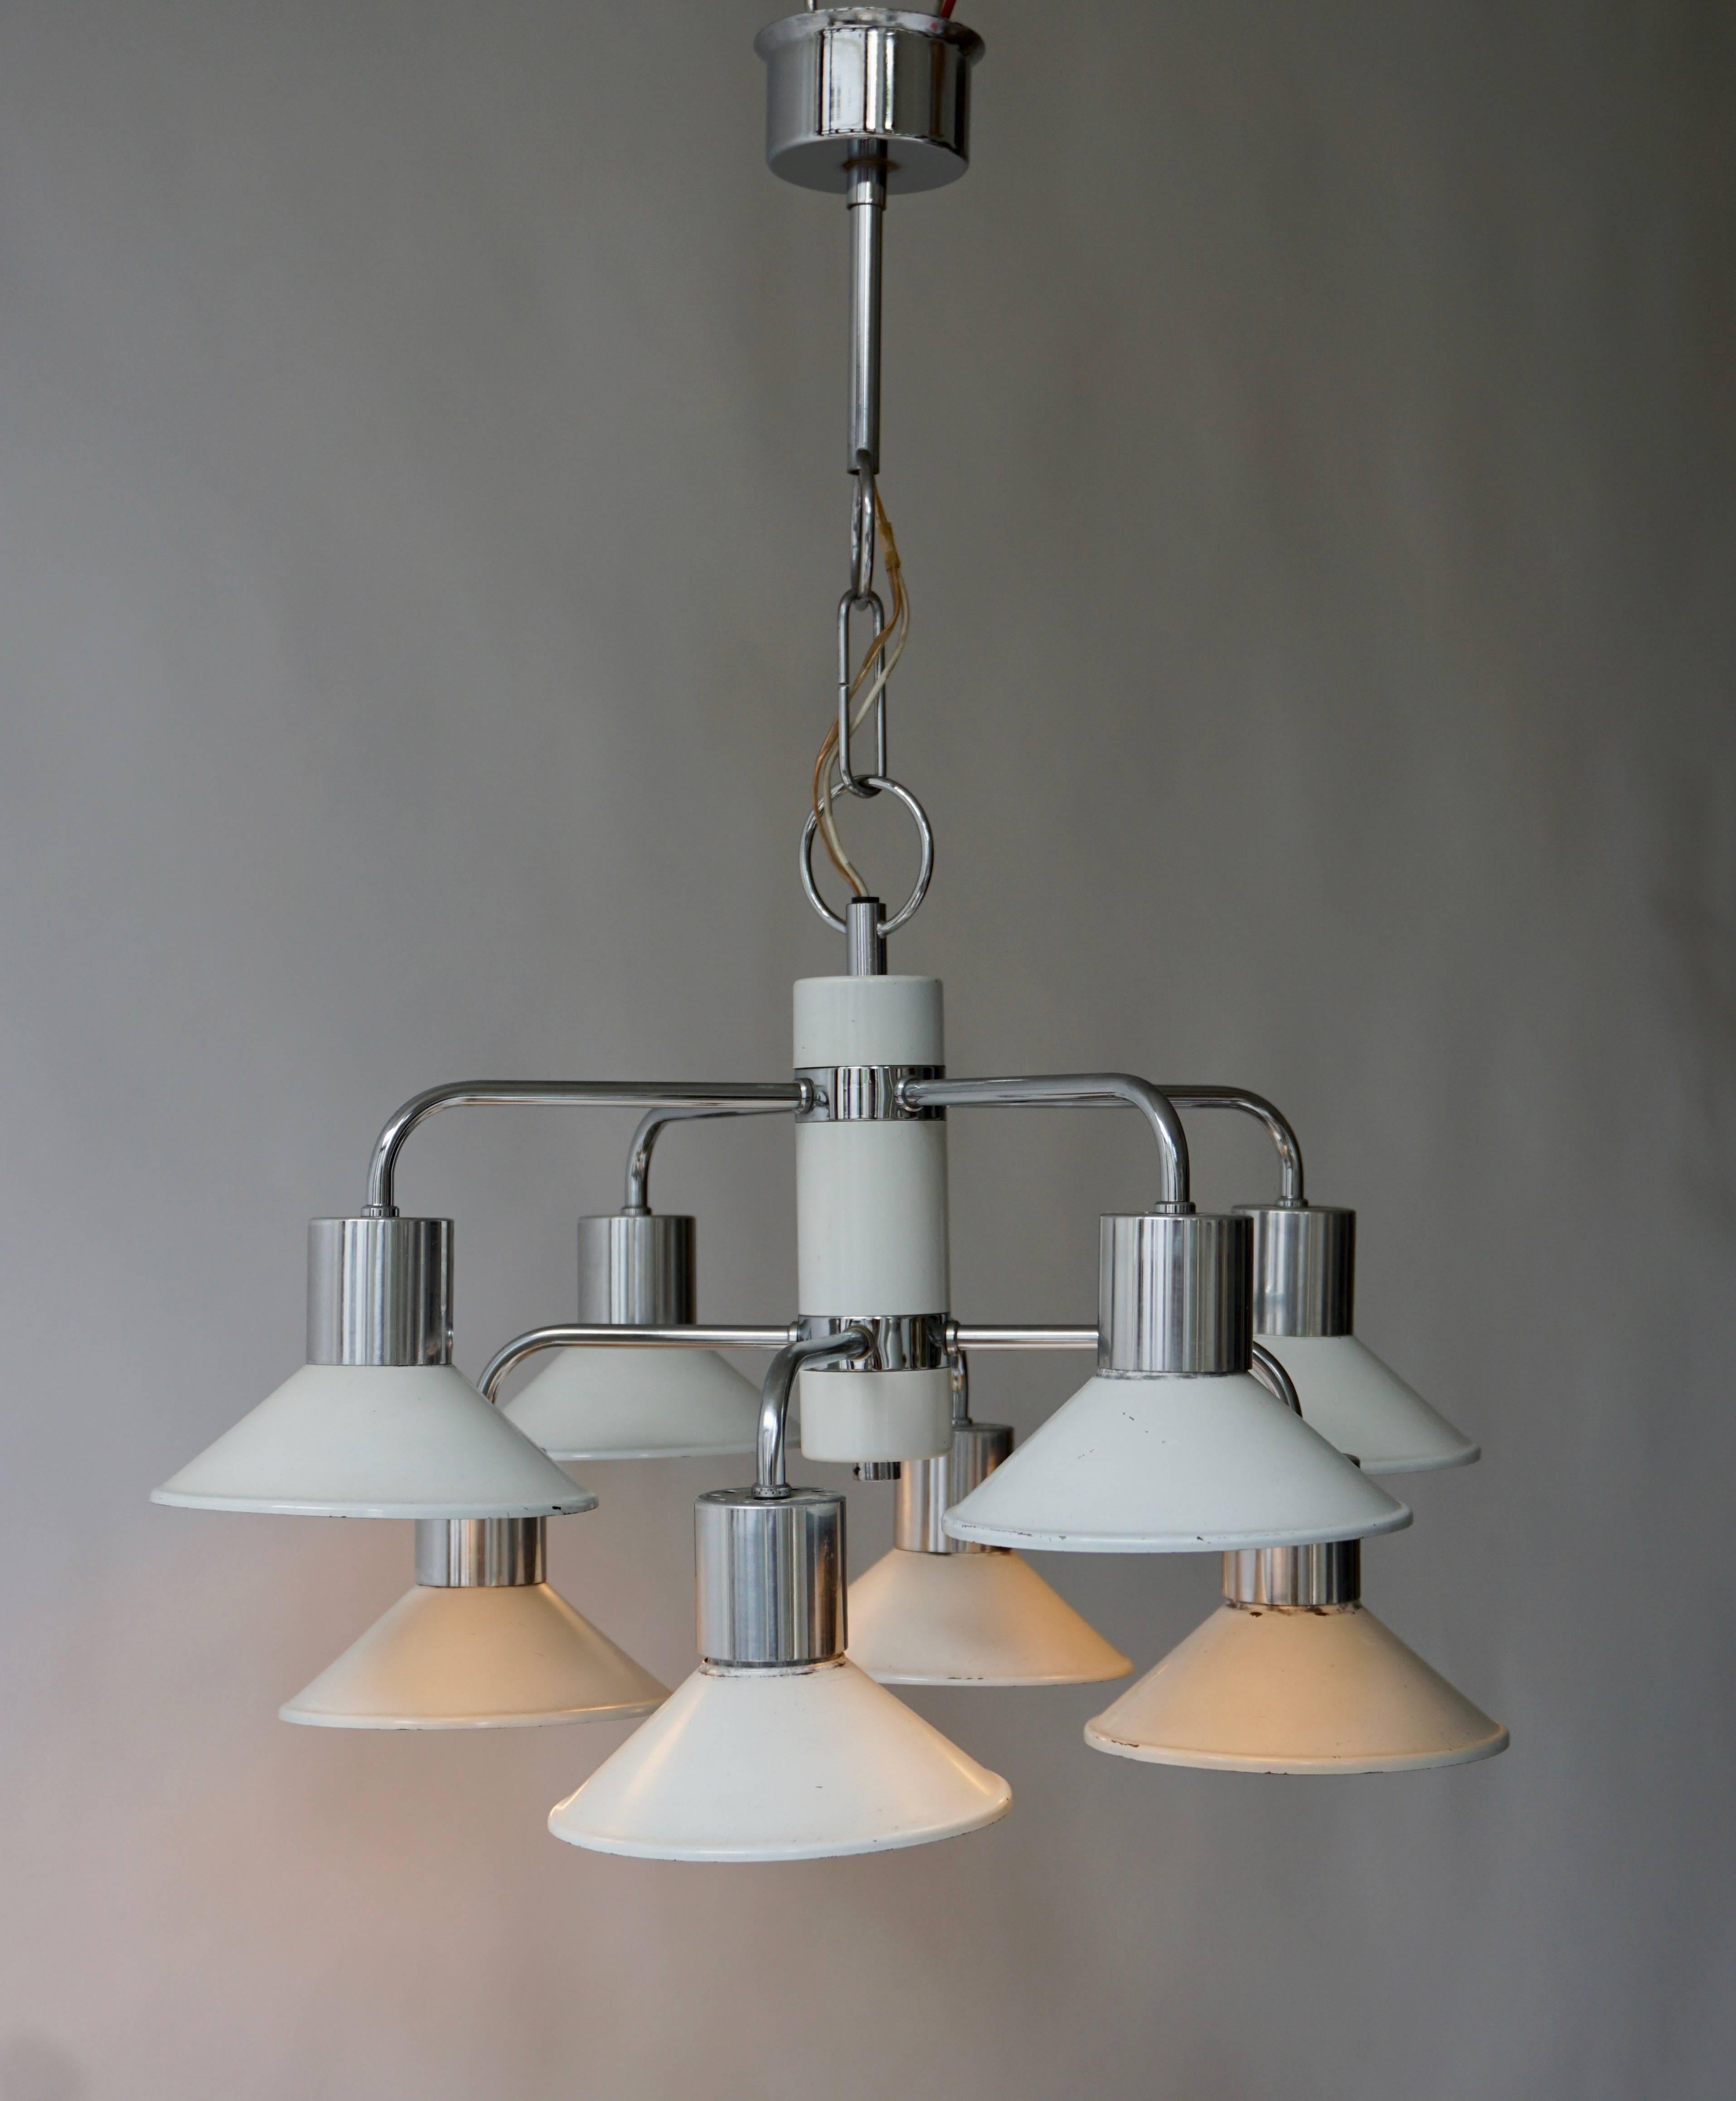 Chandelier in metal with eight E27 bulbs.
Measures: Diameter 58 cm.
Height fixture 33 cm.
Total height with the chain 70 cm.